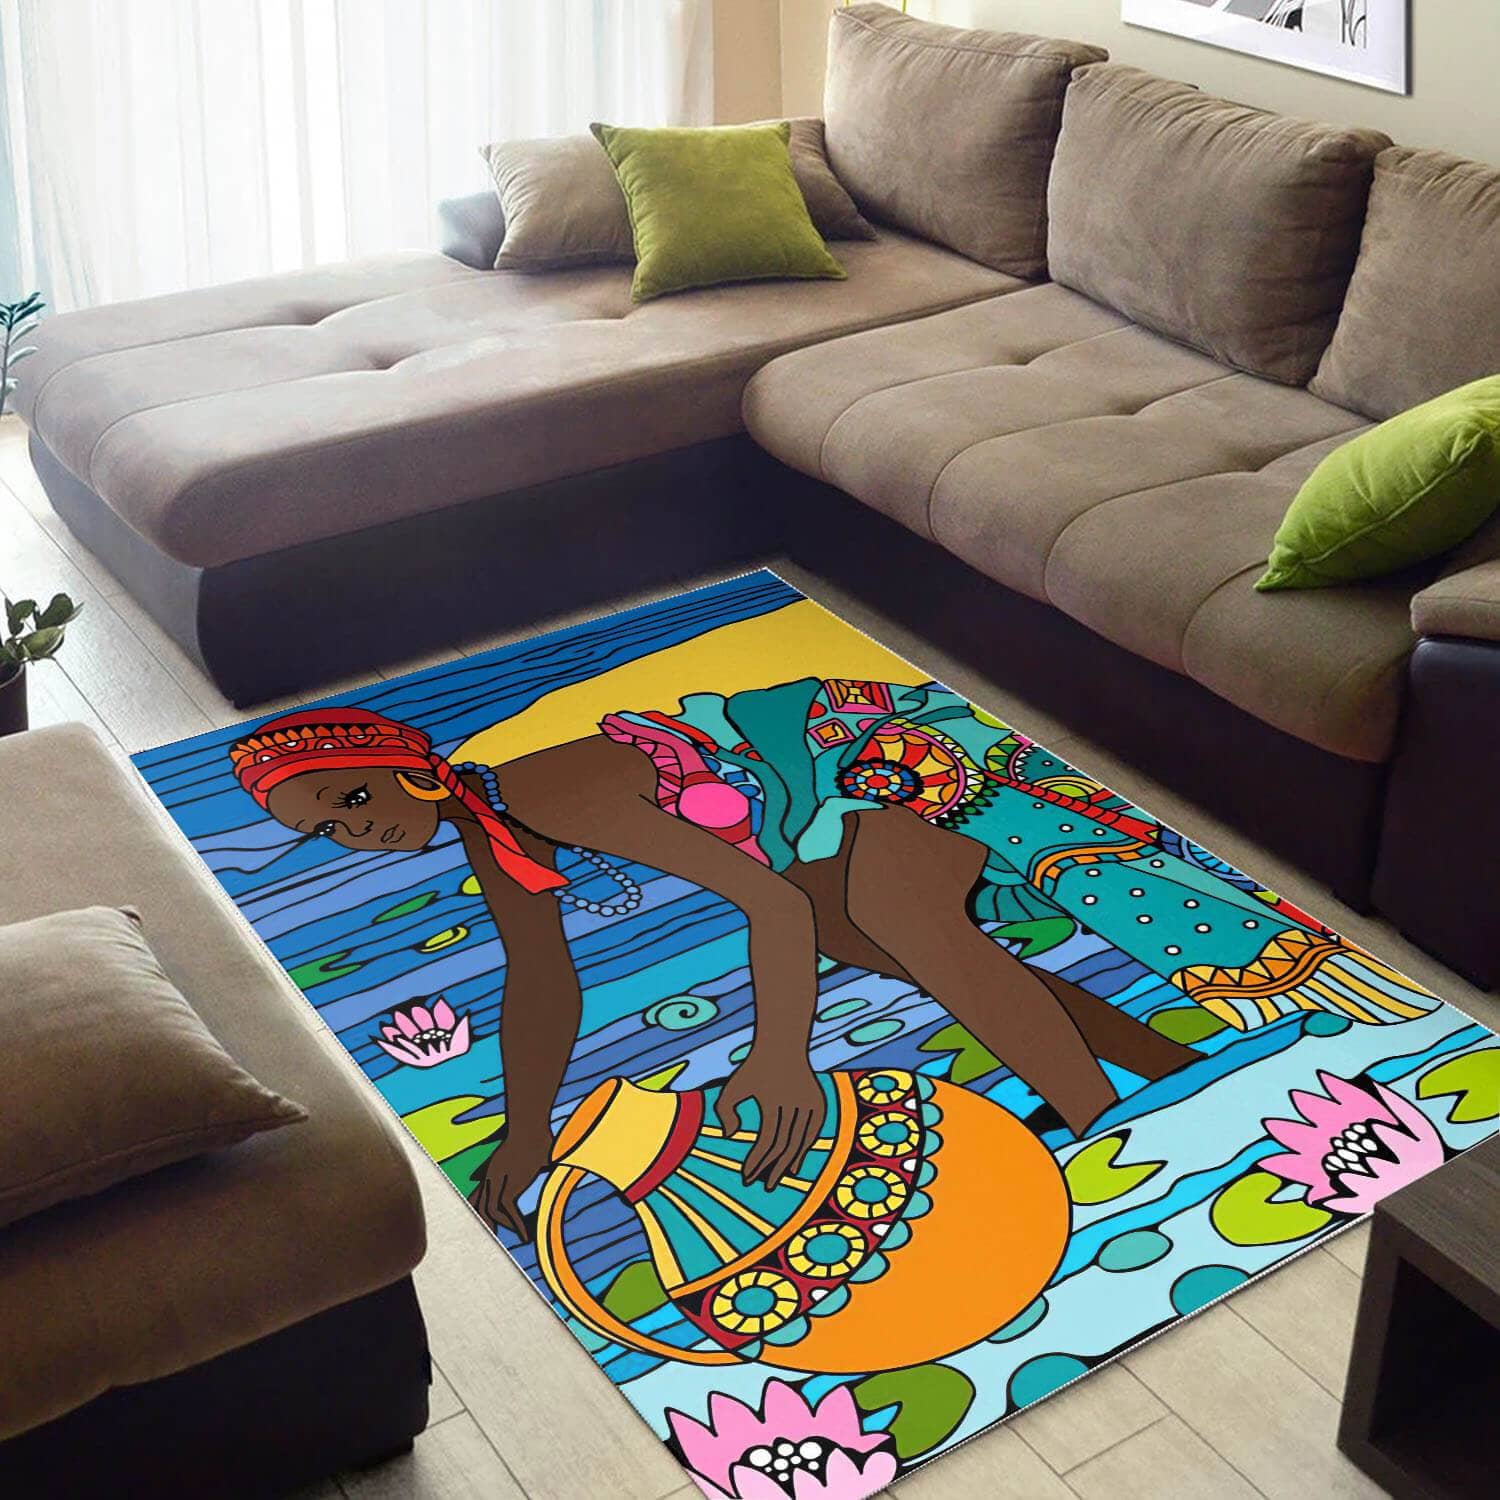 Afrocentric Pretty Black Girl Afro African Design Floor Living Room Ideas Rug